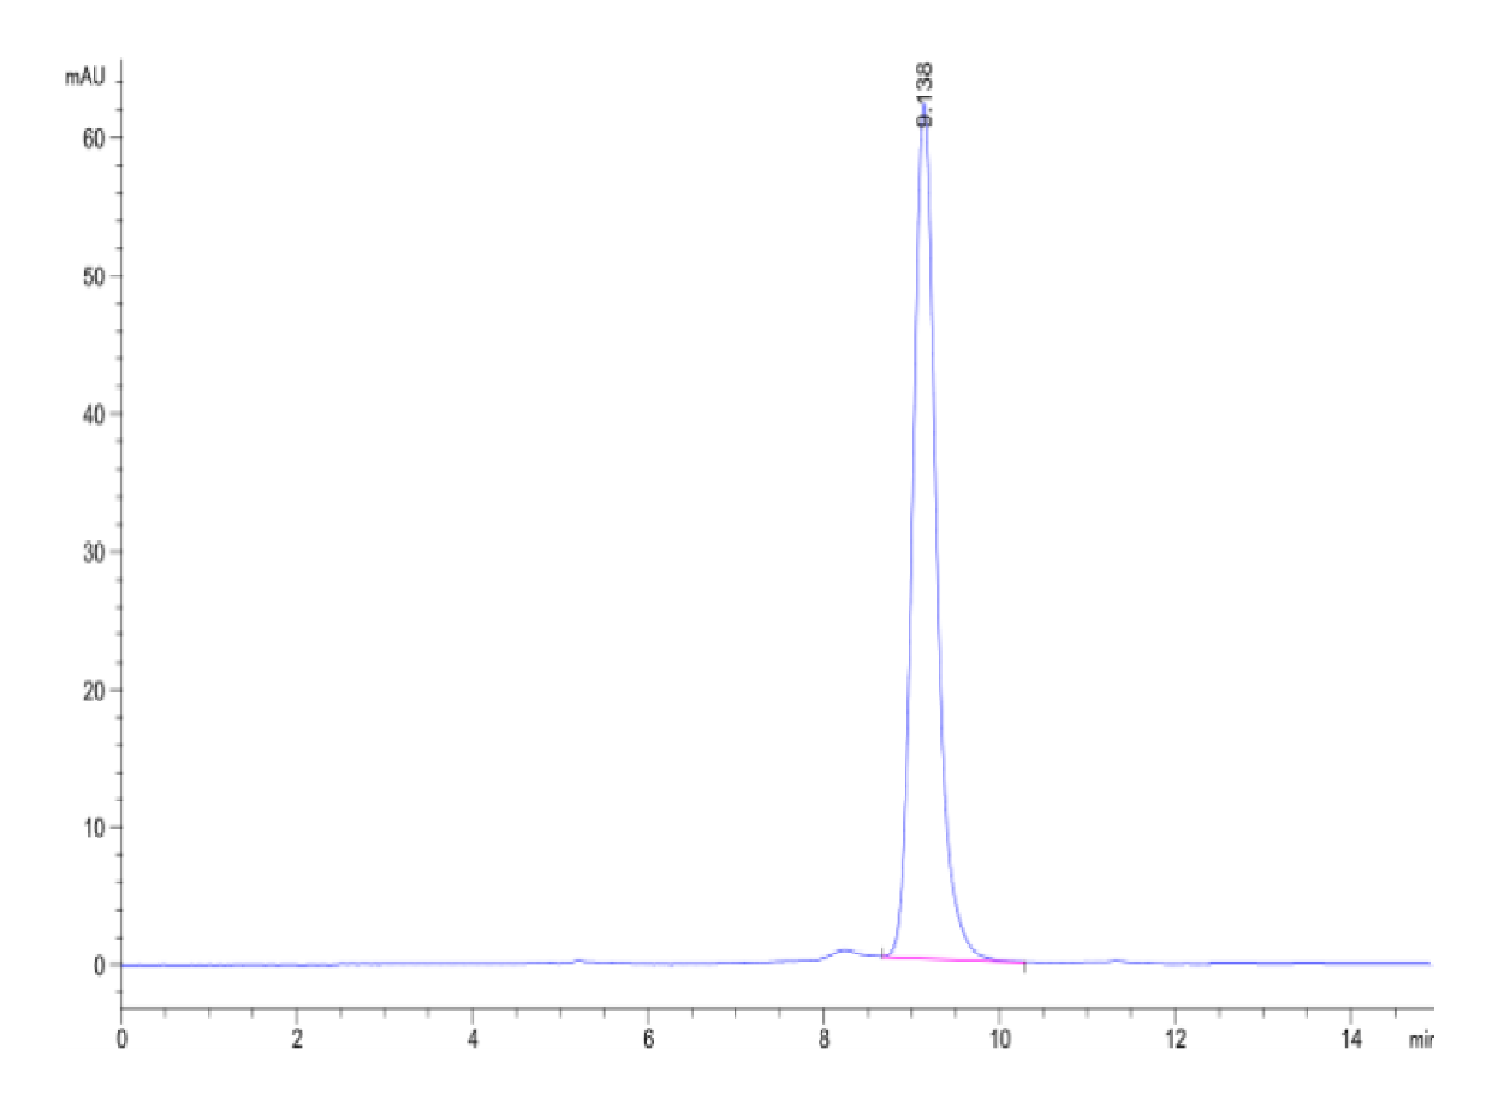 Biotinylated Human Peptide Ready HLA-A*02:01&B2M Monomer-Protein (MHC-HM43RB)